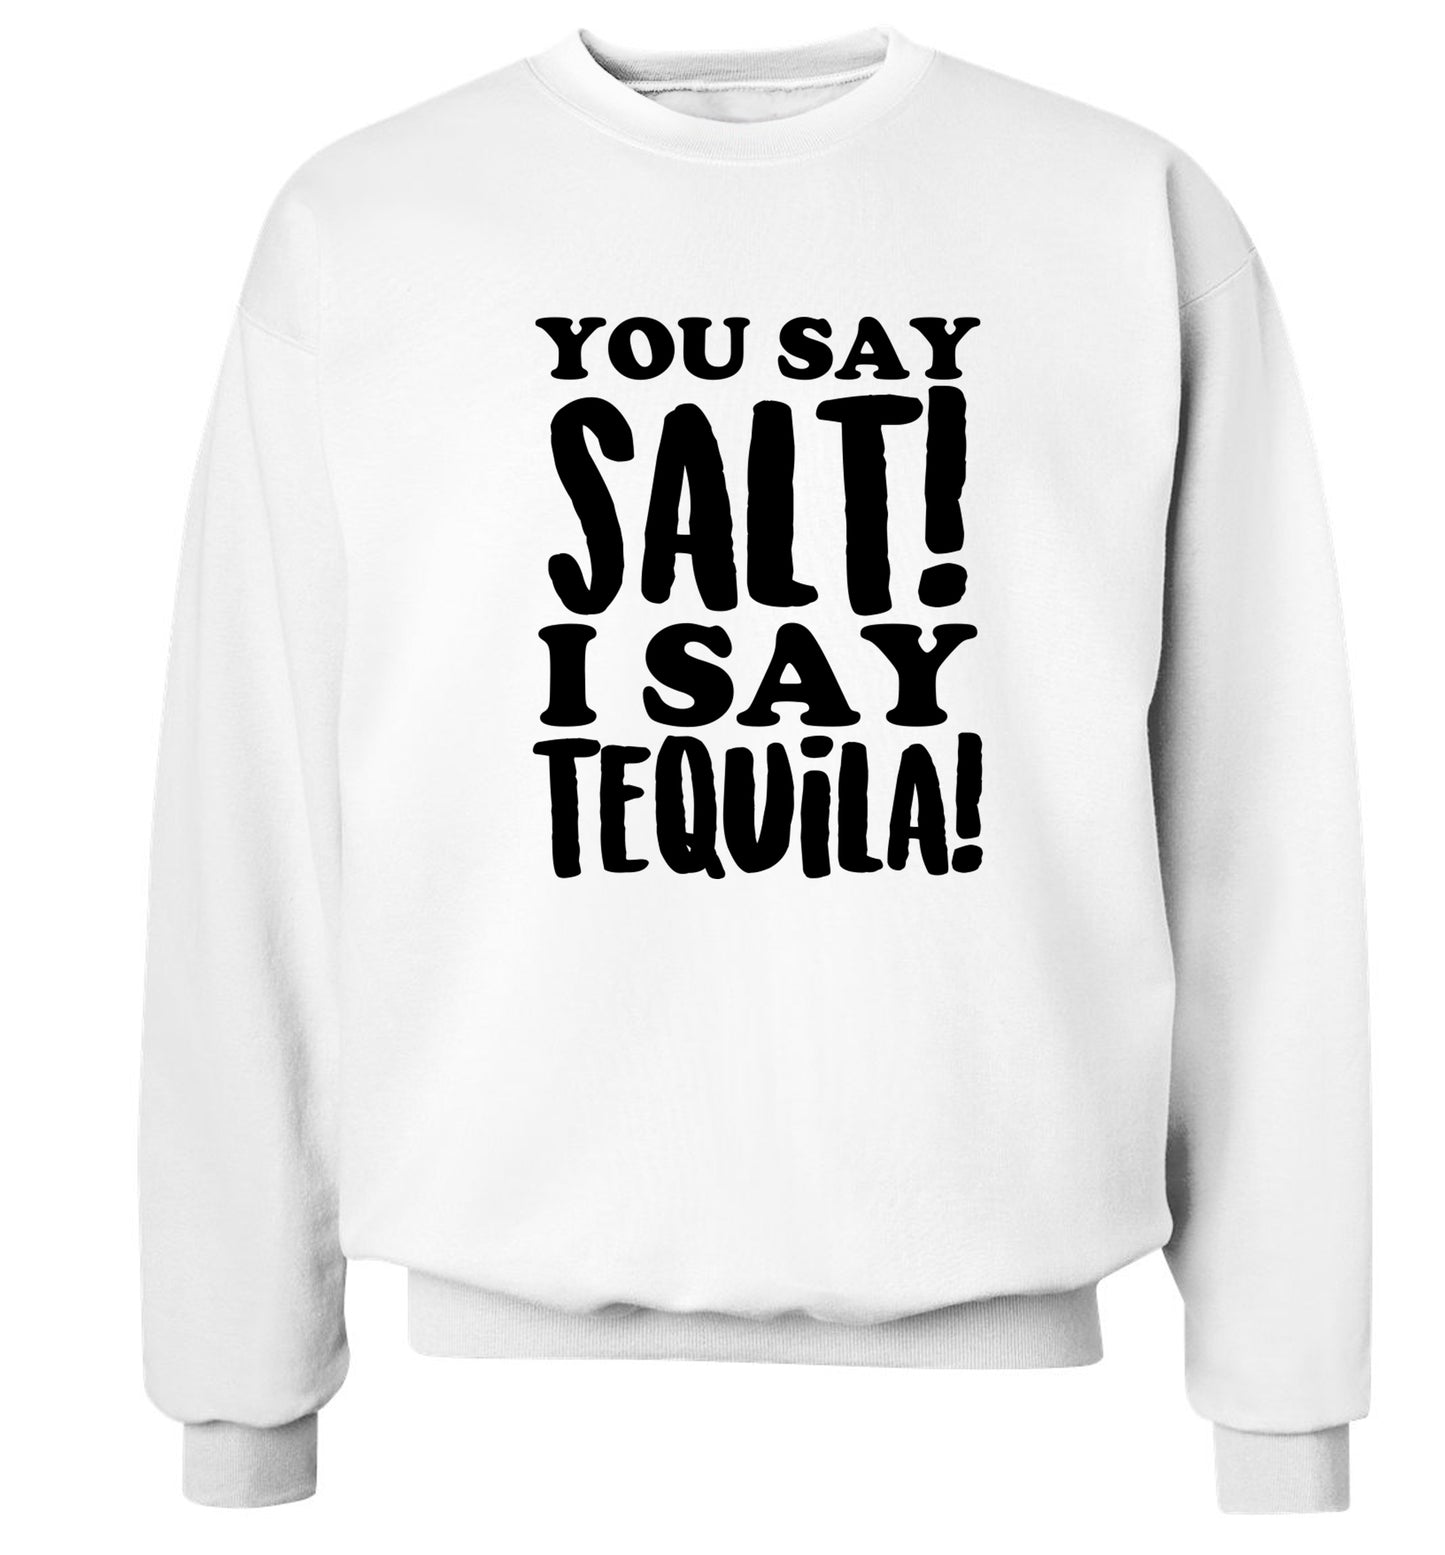 You say salt I say tequila Adult's unisex white Sweater 2XL